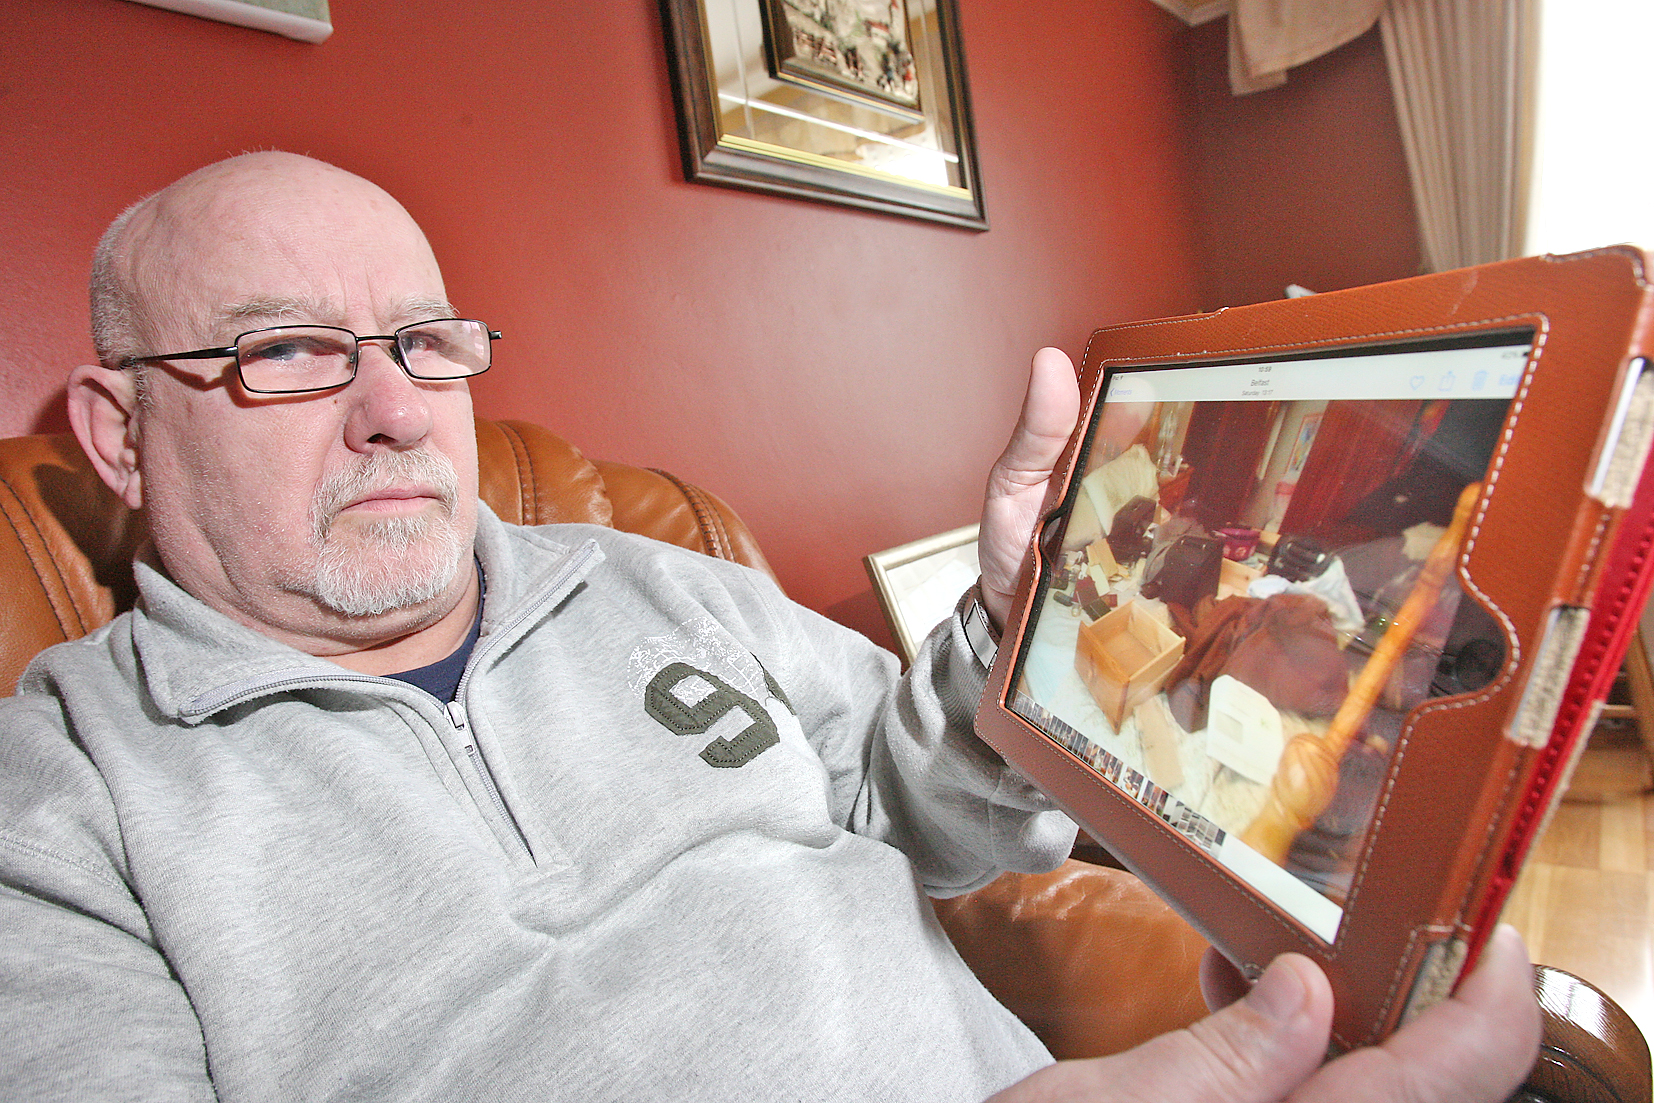 Devastated: Tony Gibson with an image of the ransacked bedroom on his iPad